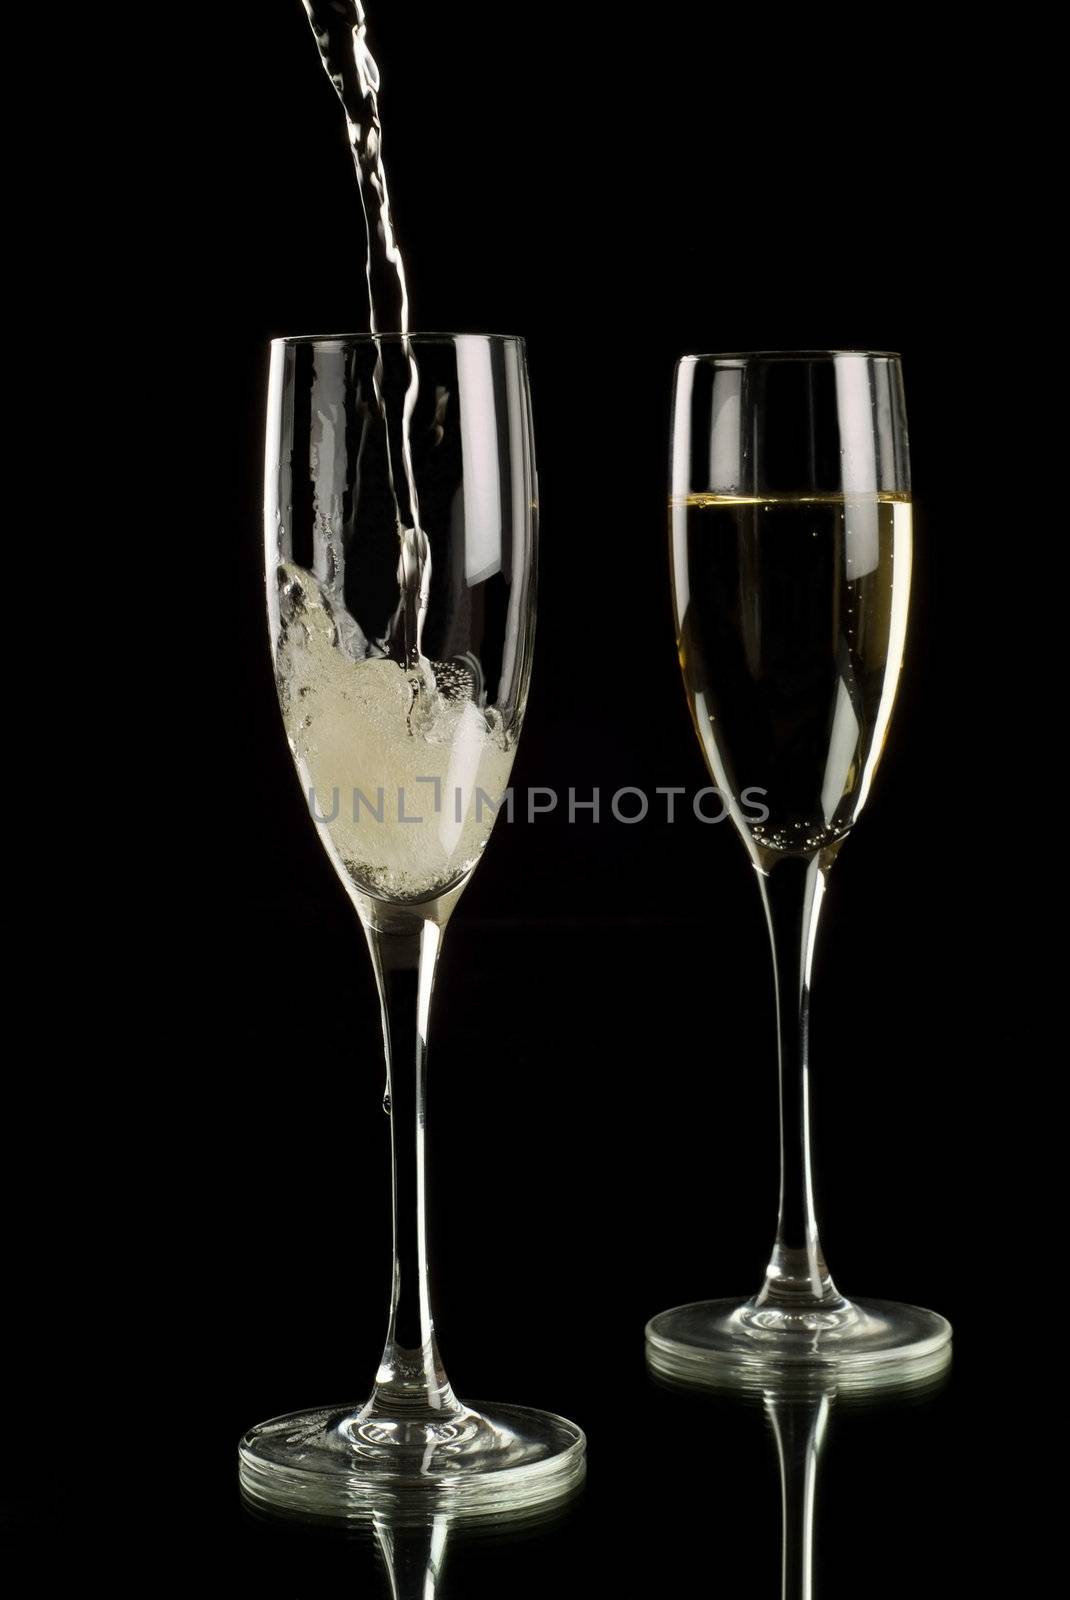 Pouring sparkling wine into champagne flutes on a black background with reflection in a mirror